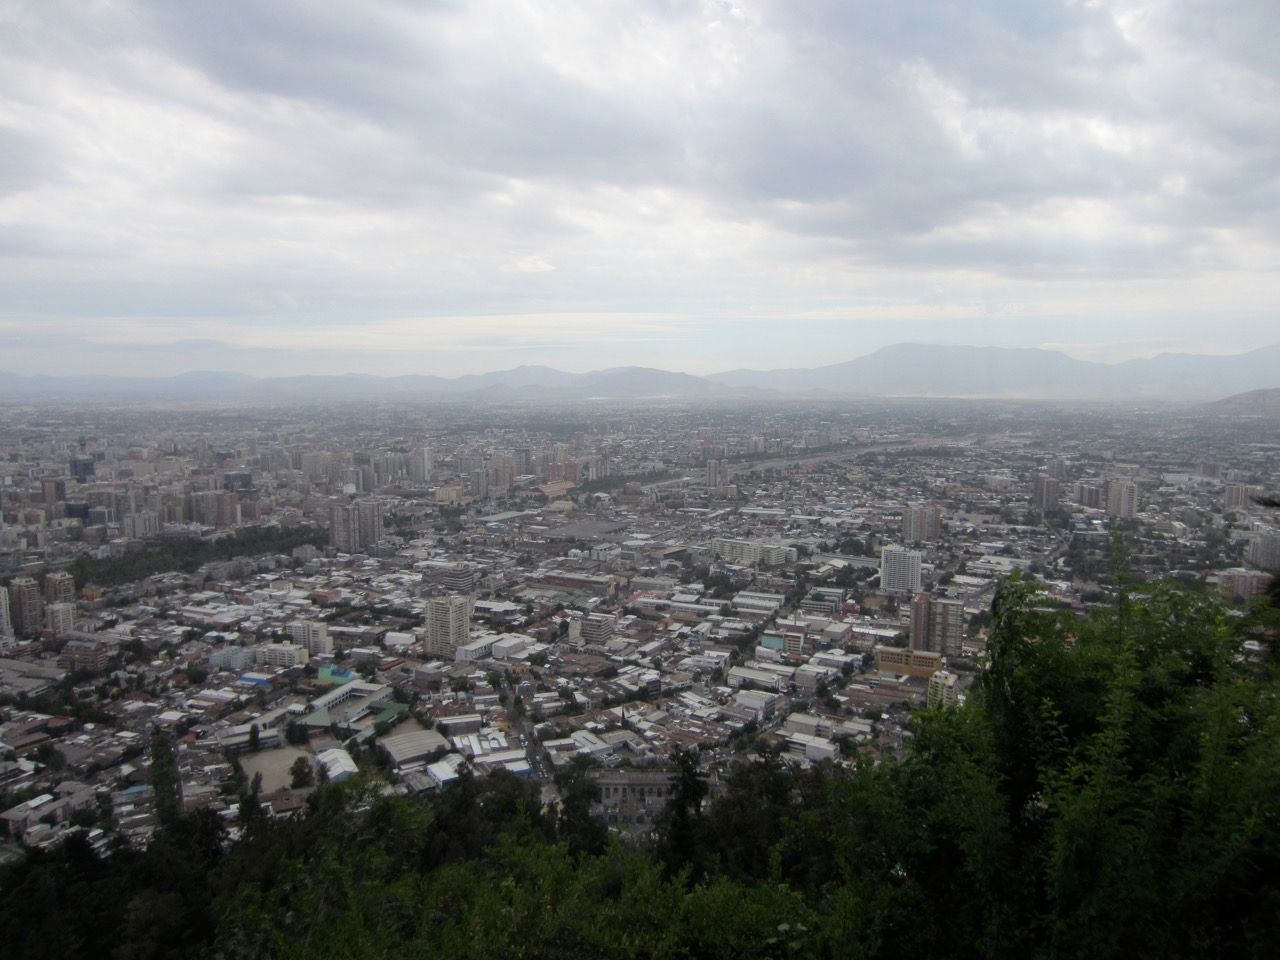 Overlooking Santiago from atop a hill.